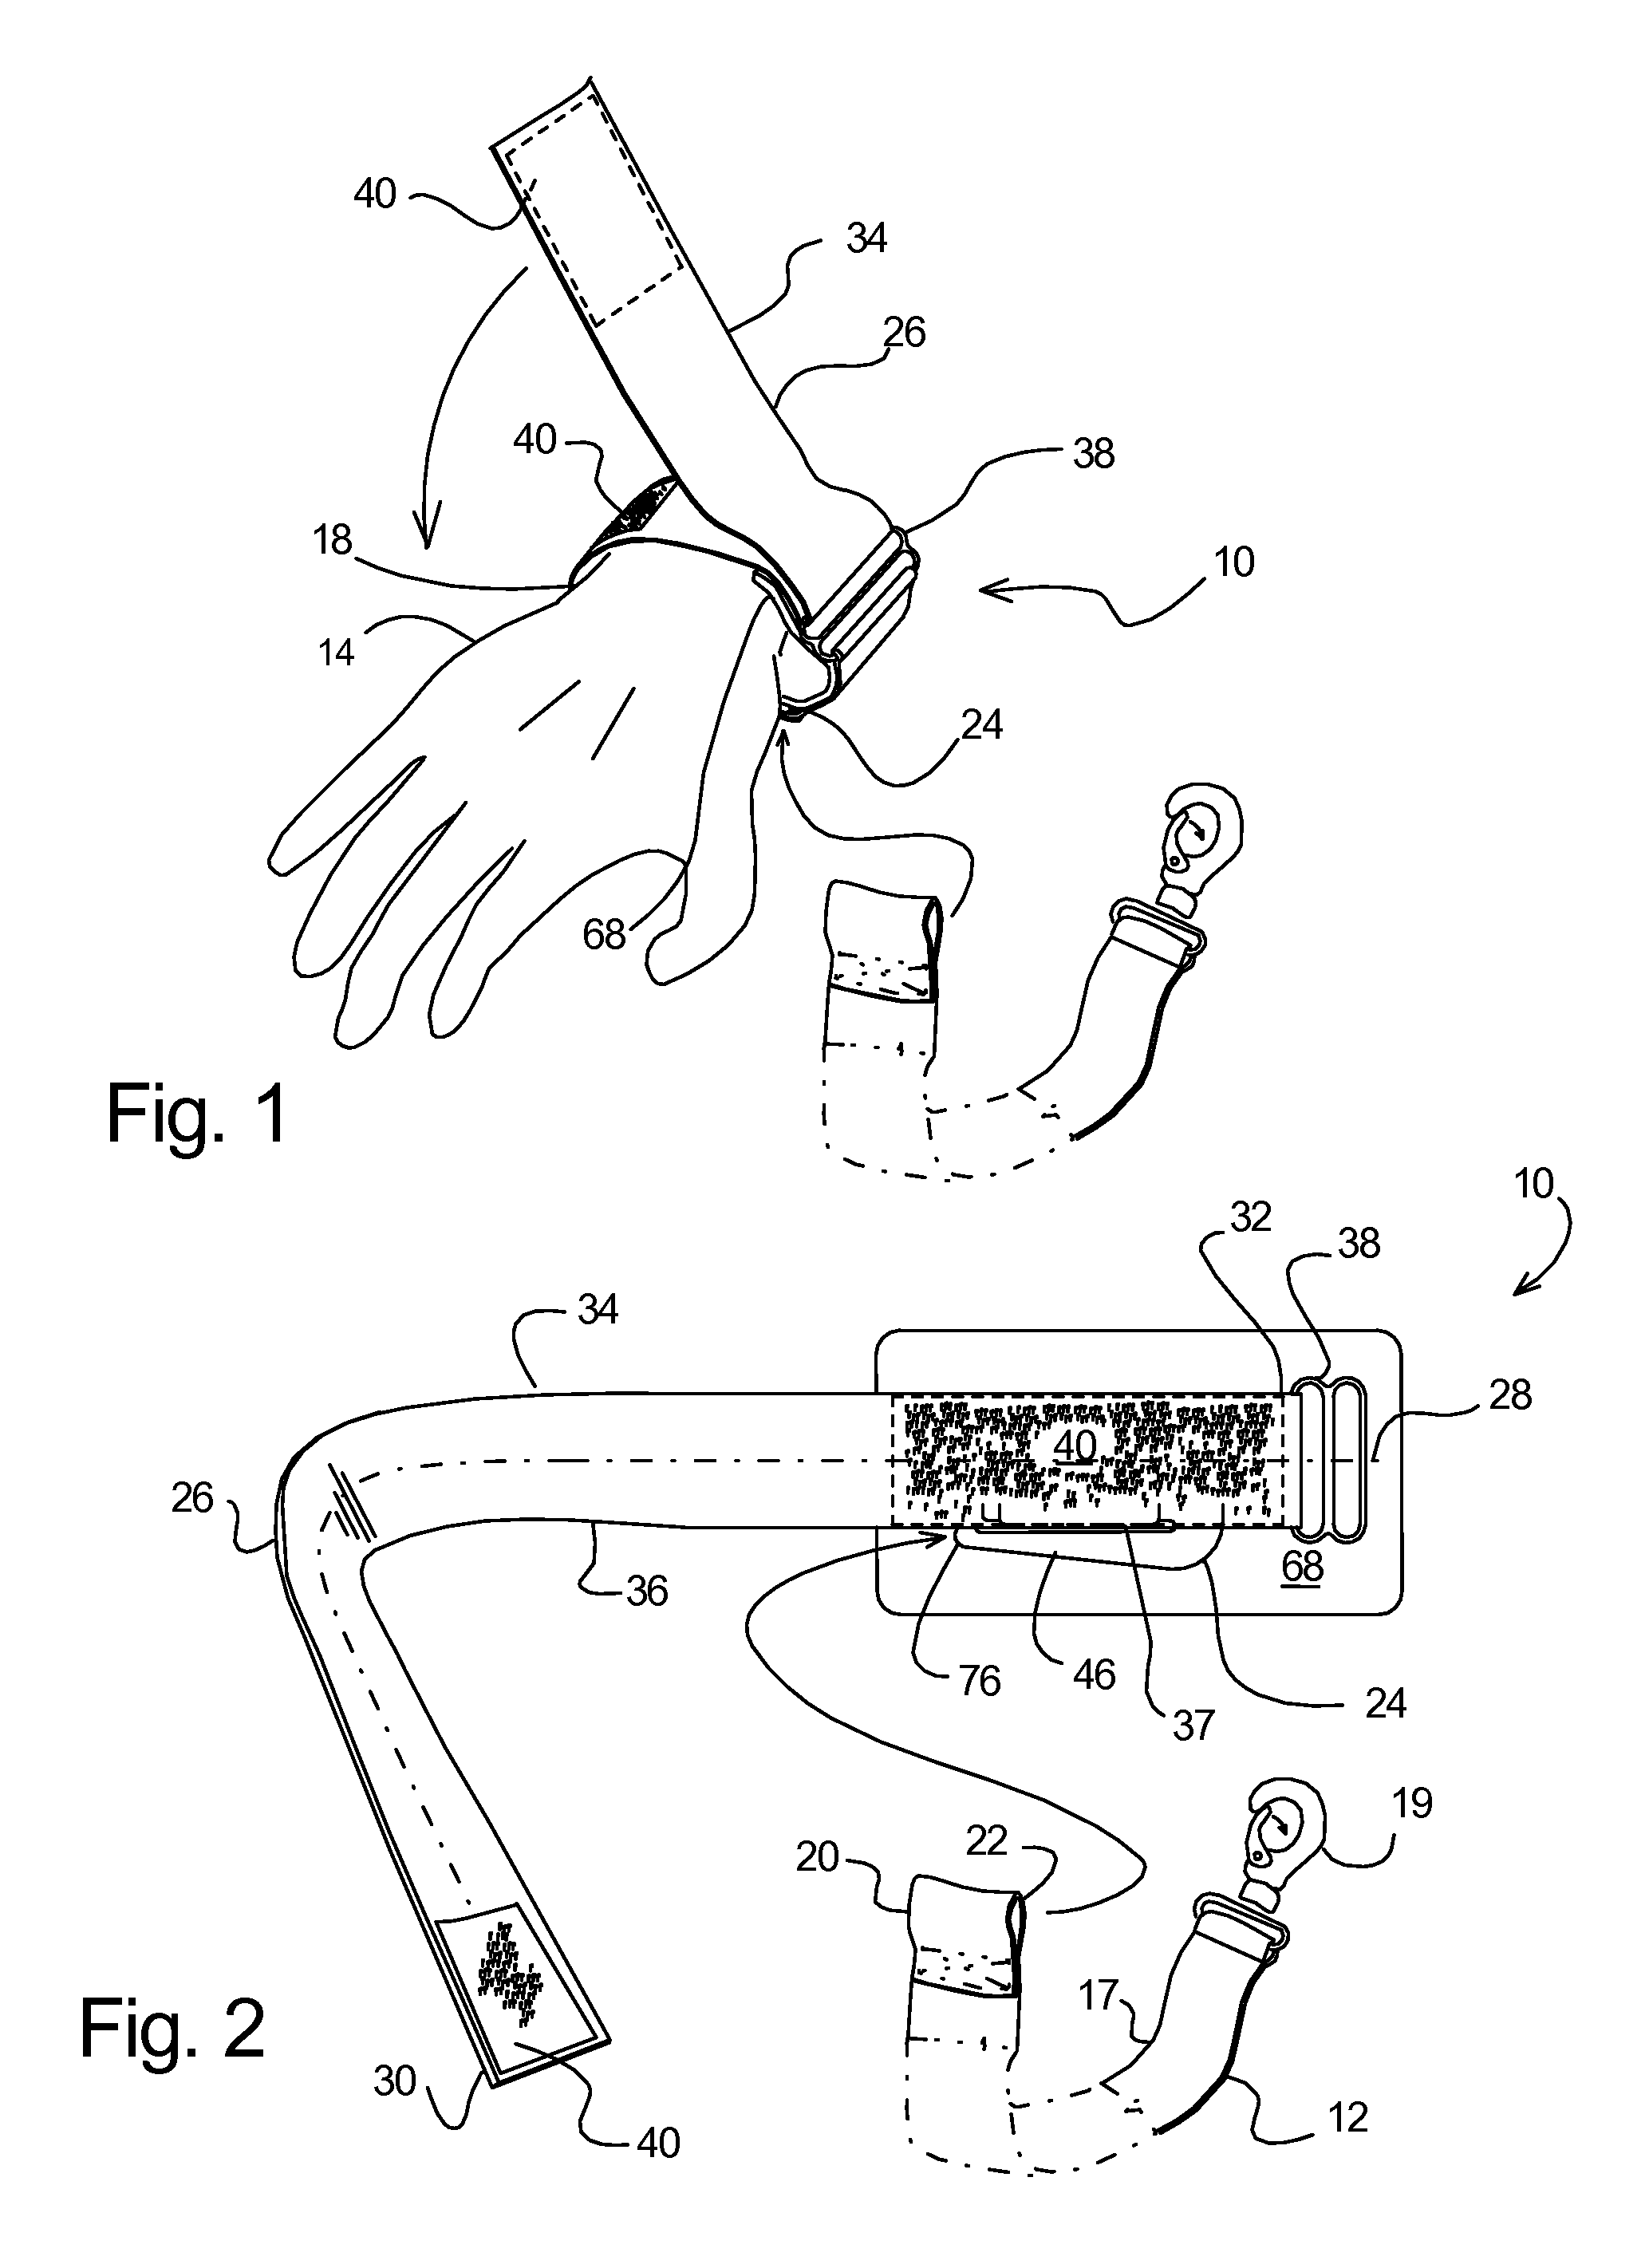 Weight lifting strap with equipment engagement system